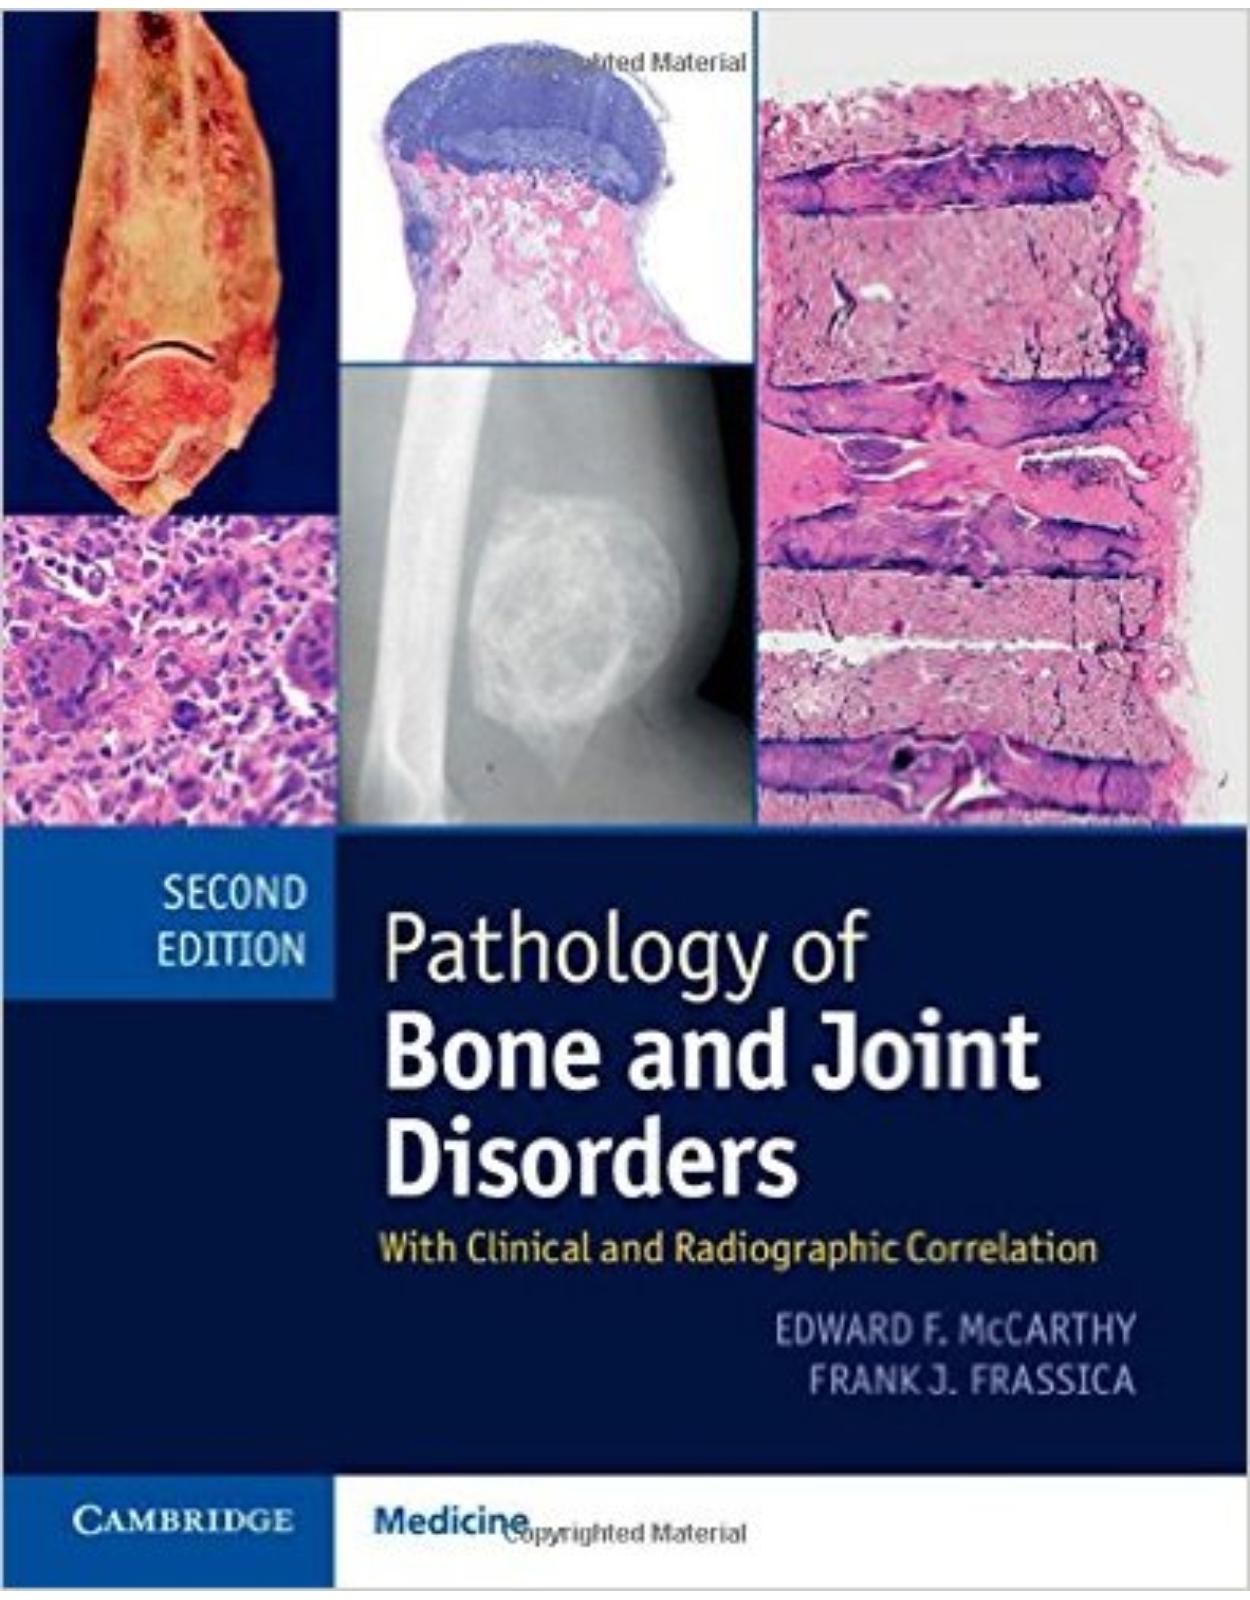 Pathology of Bone and Joint Disorders Print and Online Bundle: With Clinical and Radiographic Correlation 2nd Edition